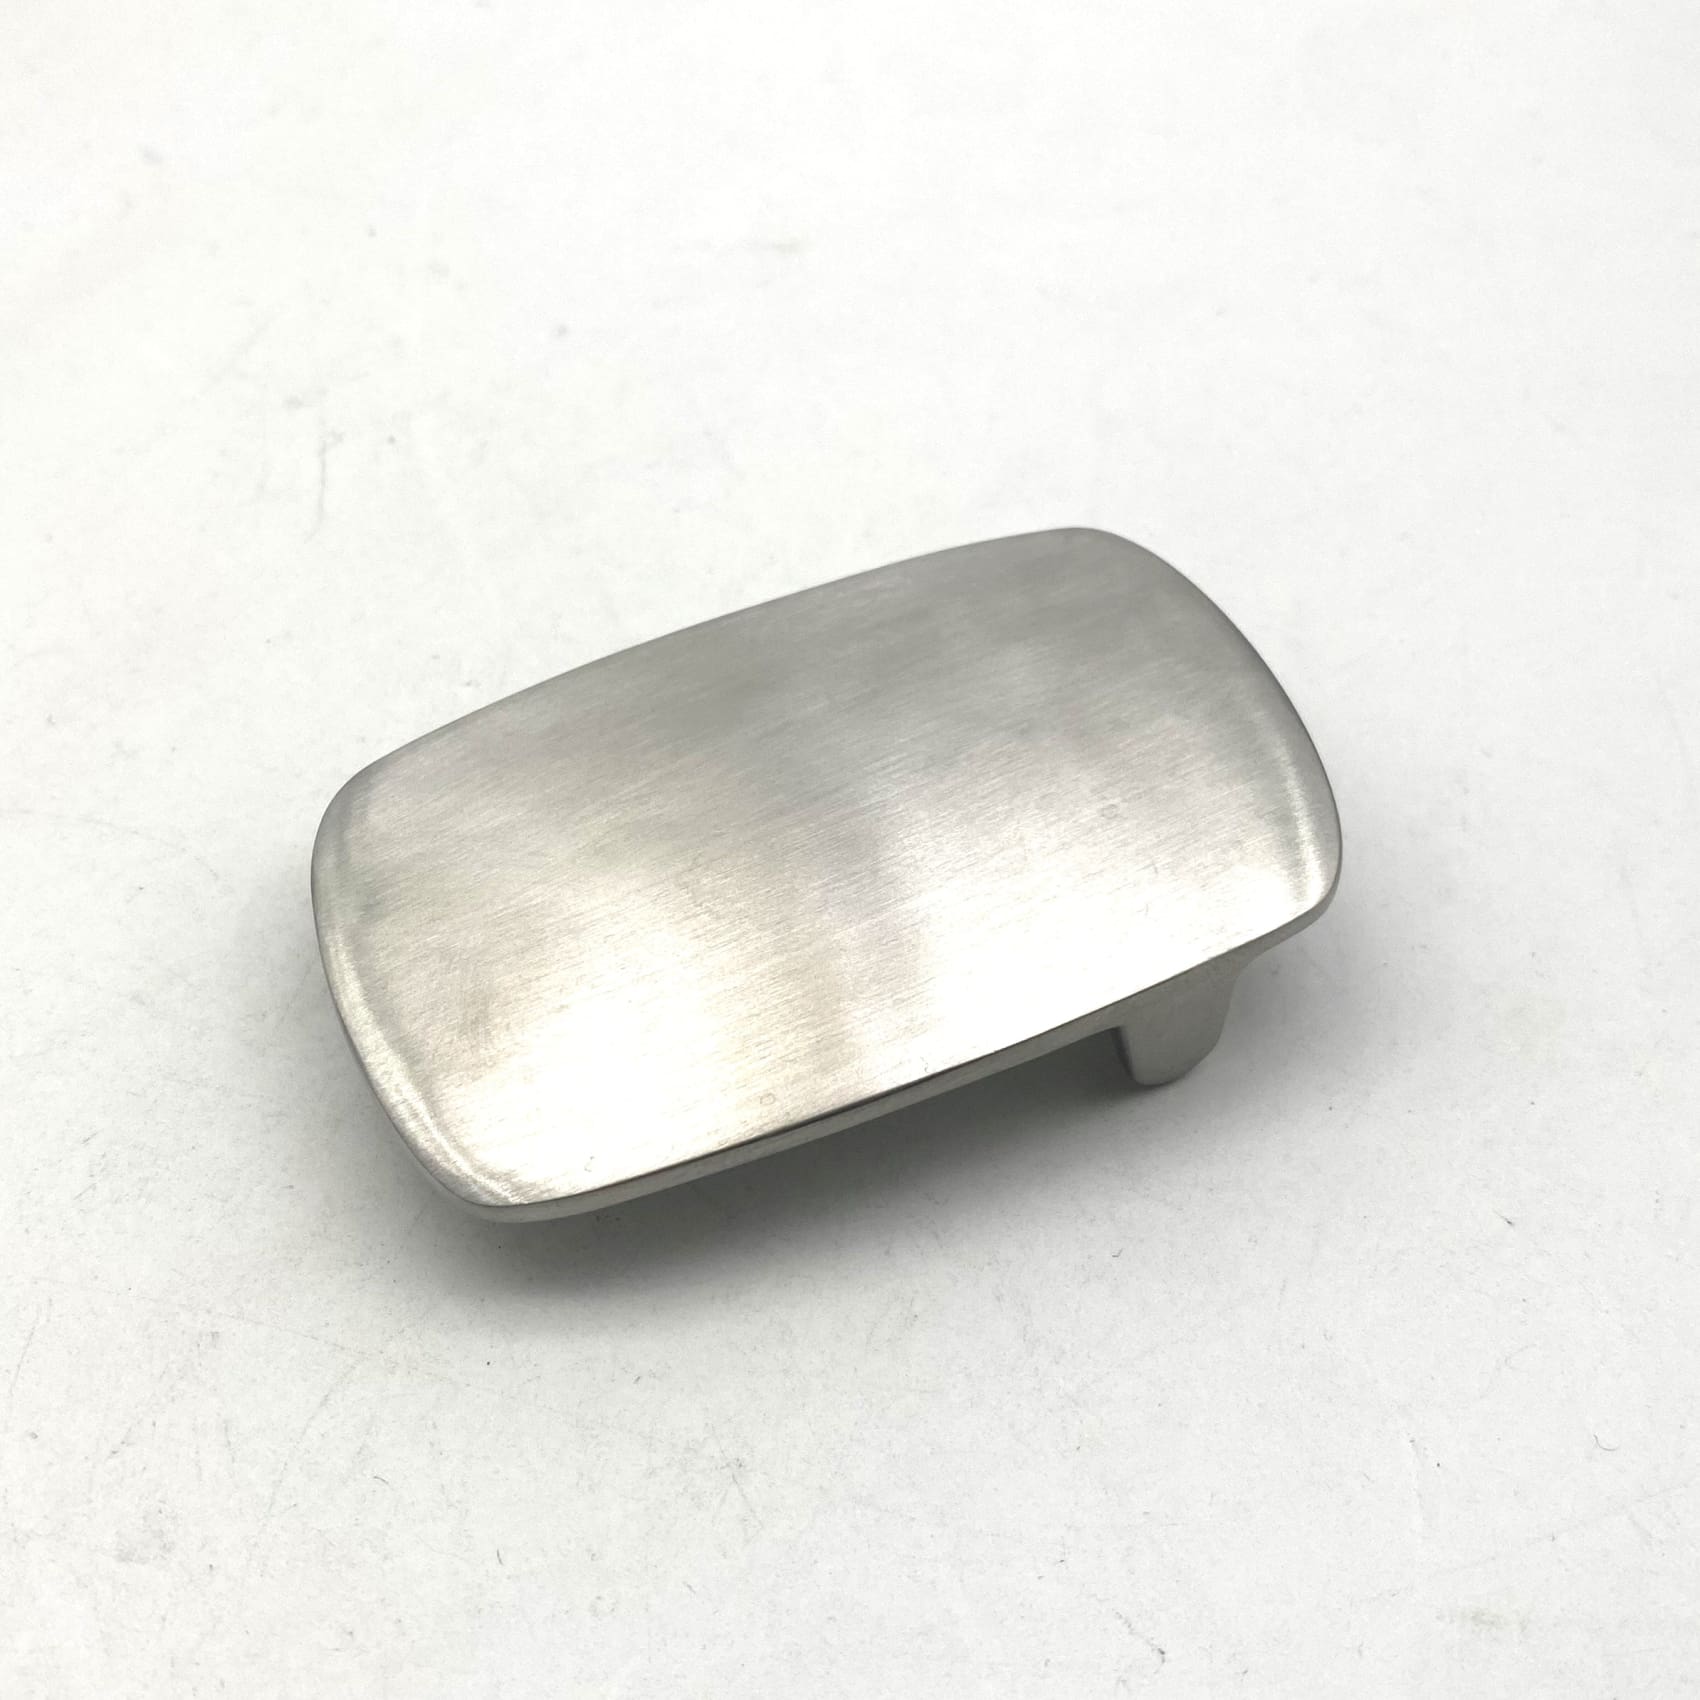 Matte Finish Stainless Plain Buckle For Leather Belt Crafting - Belt Buckles Stainless